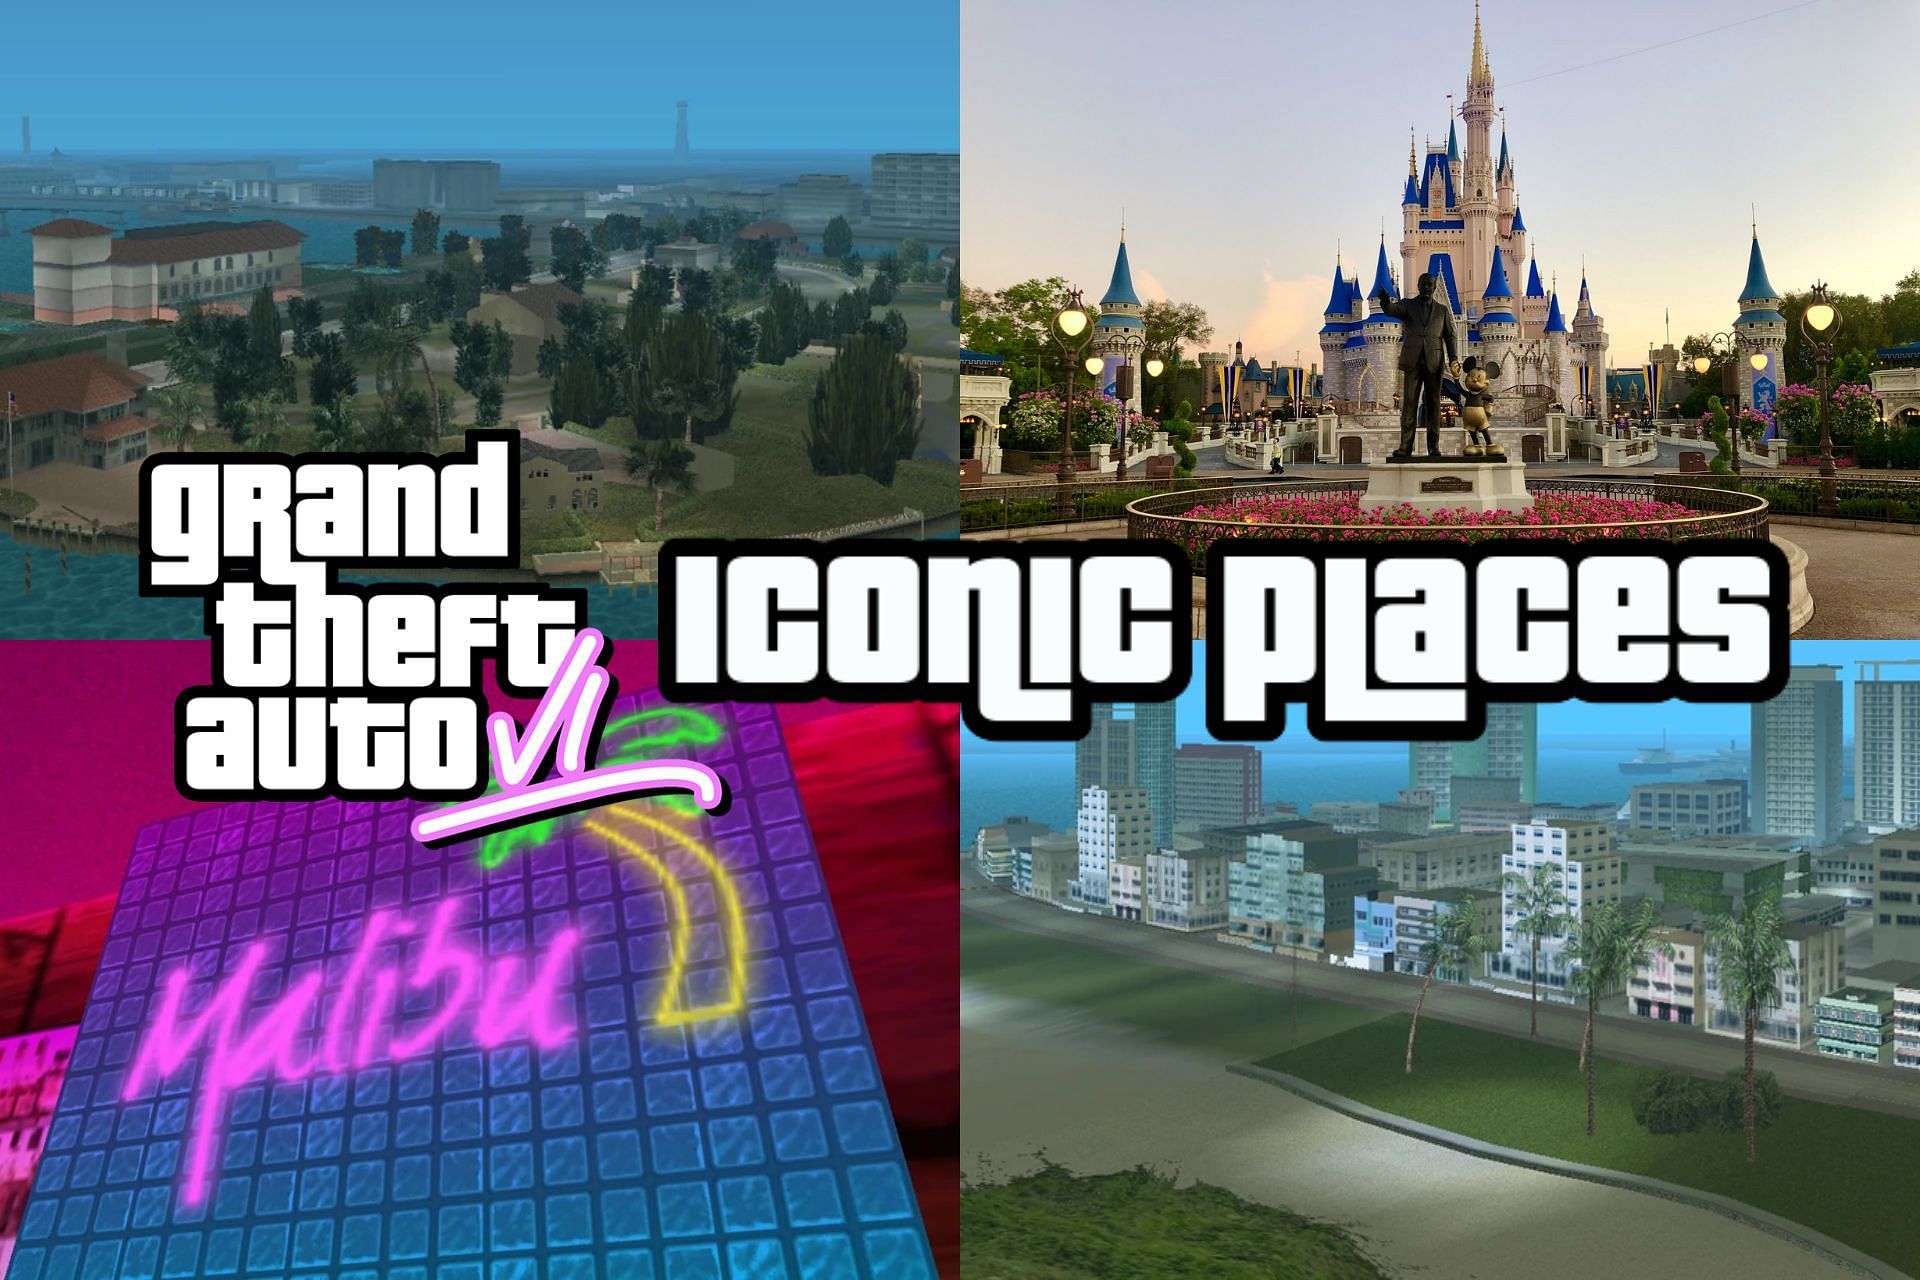 GTA fans want to see these locations in the upcoming games (Image via Sportskeeda)